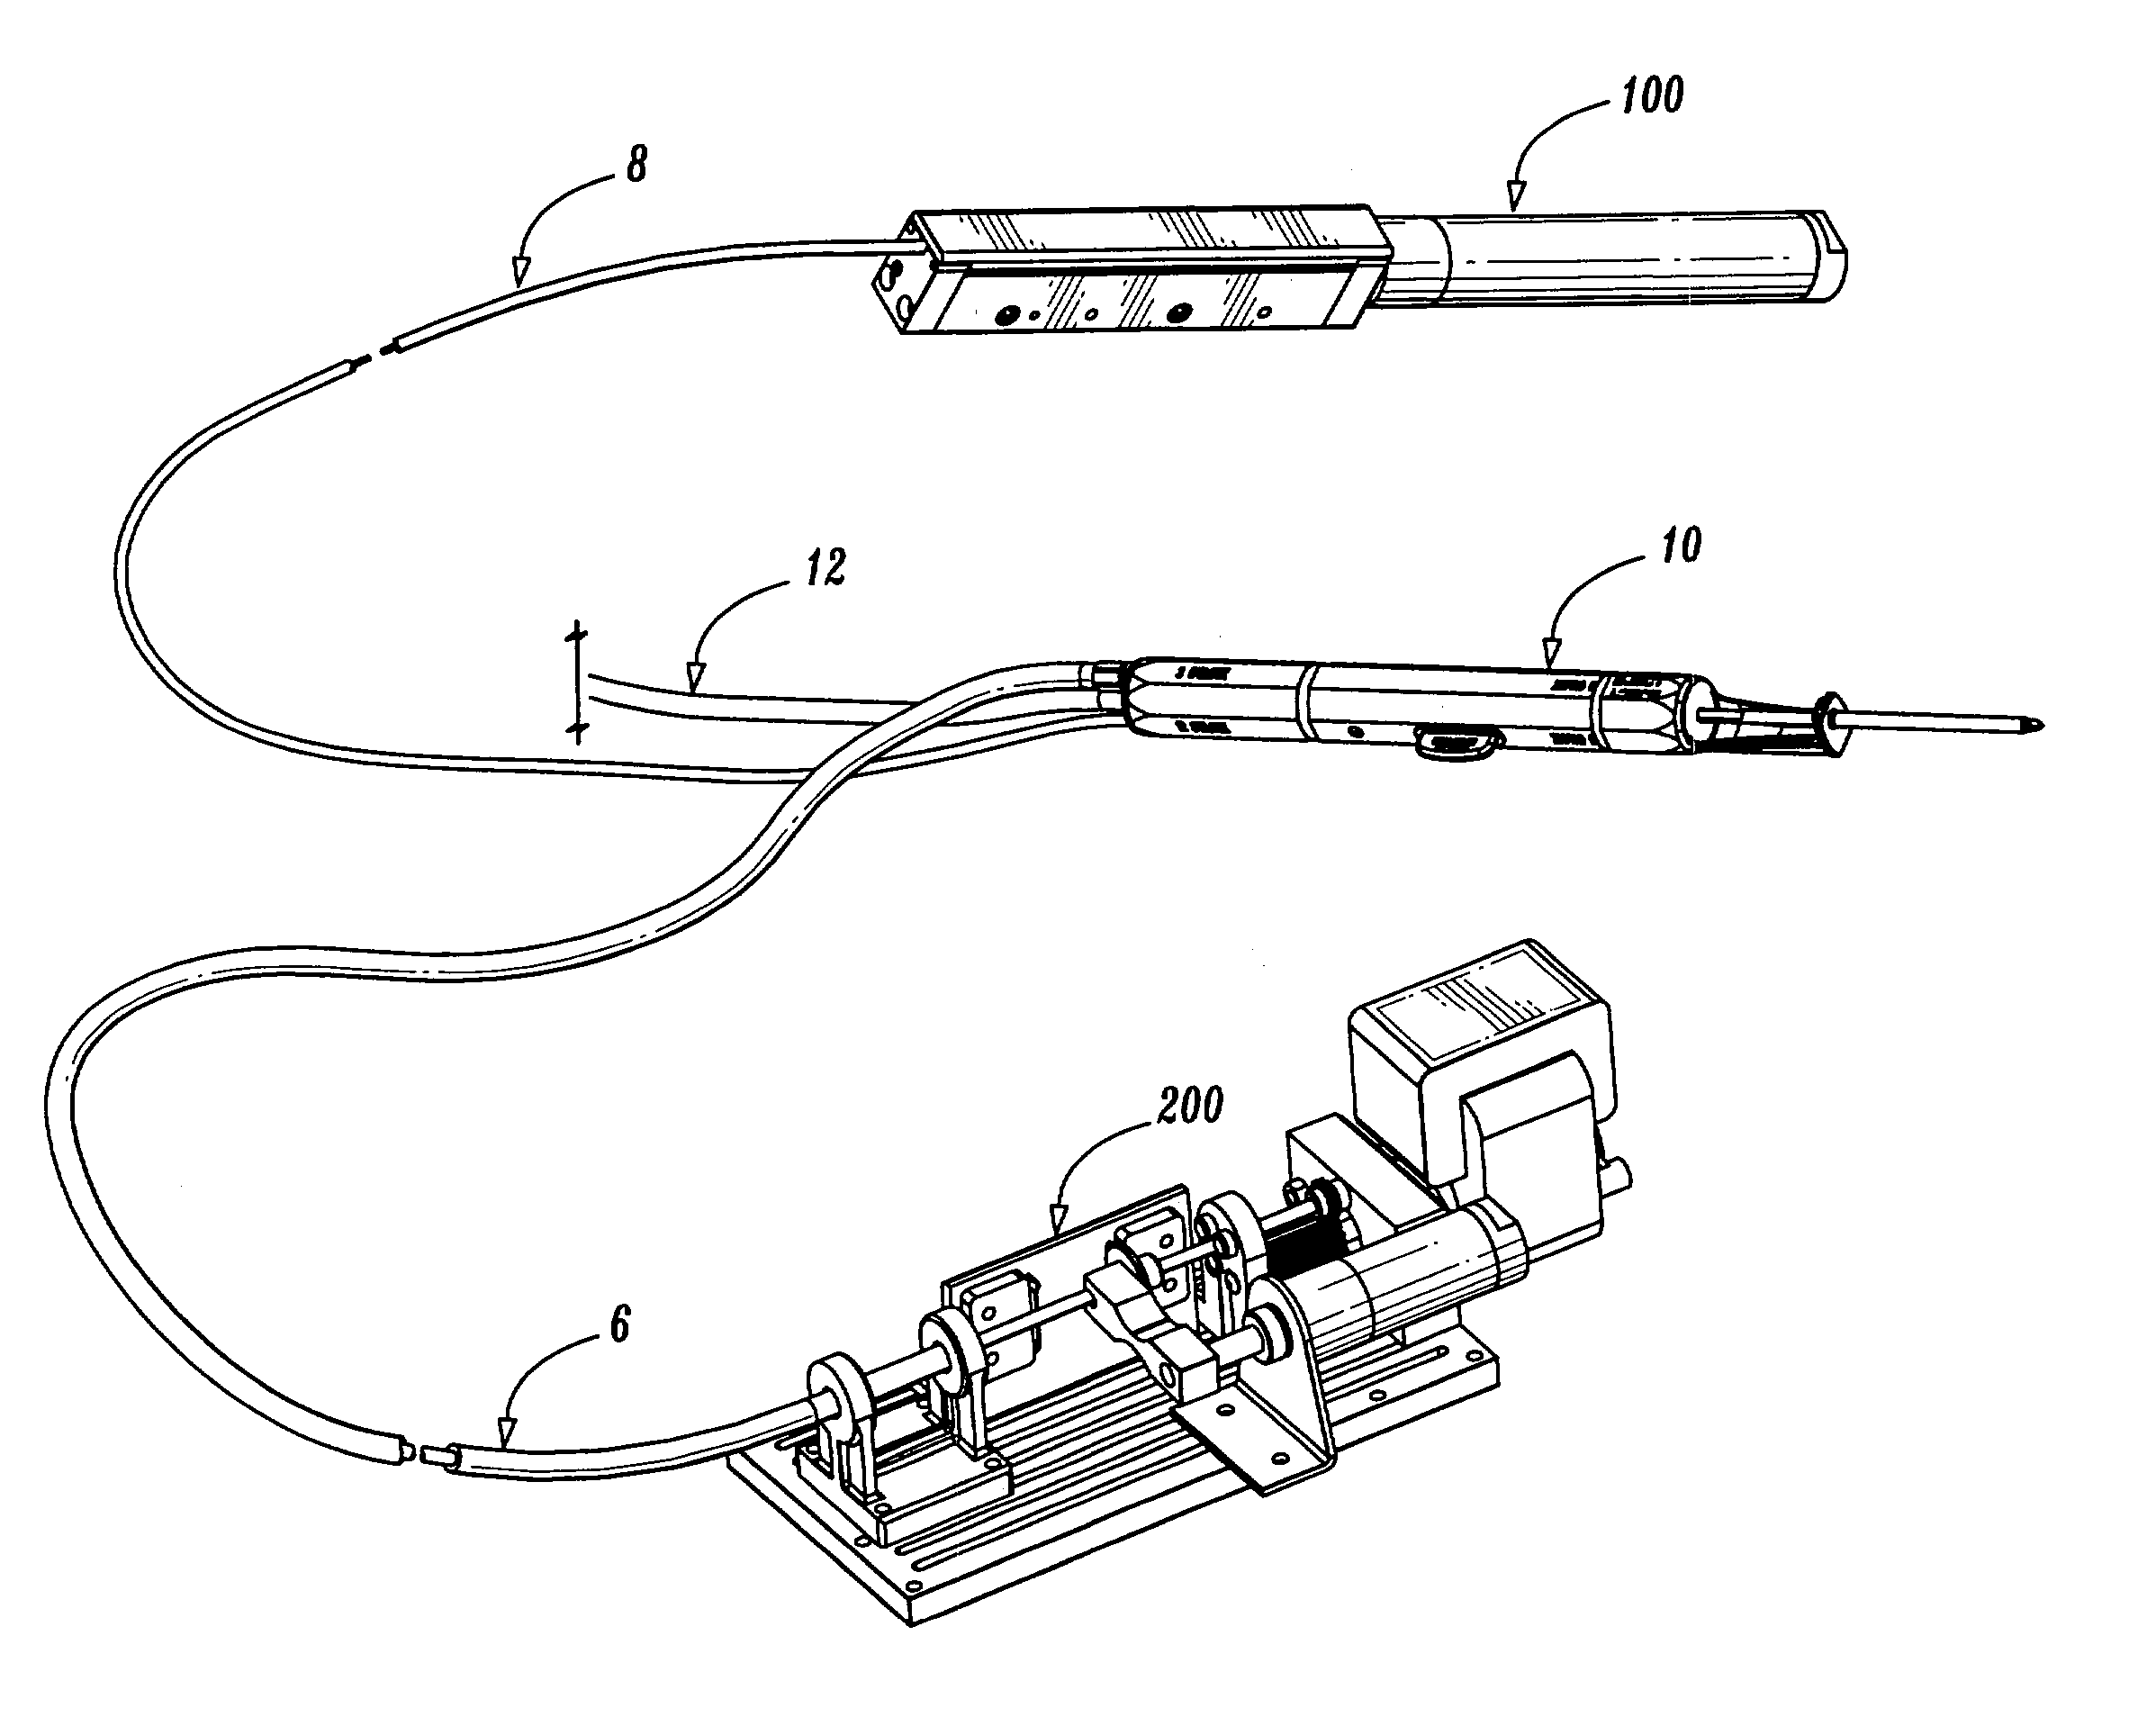 Biopsy system having a single use loading unit operable with a trocar driver, a knife driver and firing module